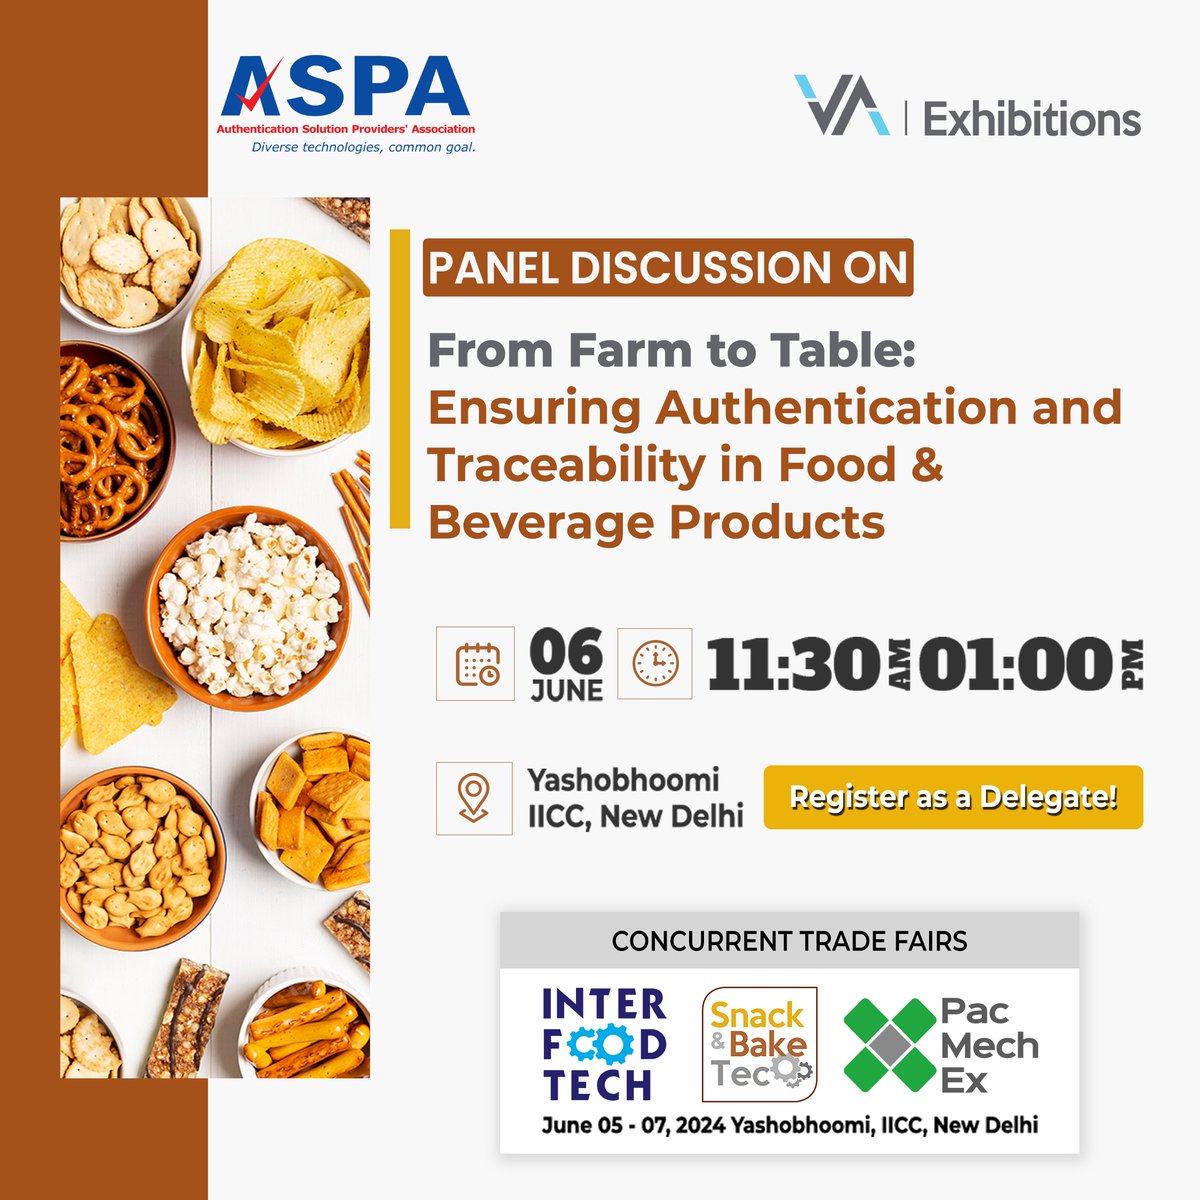 Unlock the secrets of #foodauthenticity and #traceability!   

For Delegate Registration and Exhibition details, 
Ph: +91 8801602258 
Email : ja@vaexhibitions.com. 
Registration link : interfoodtech.com/ASPA-Del 

#FoodAndBeverageIndustry #ASPA #InterFoodTech #SnackBakeTec